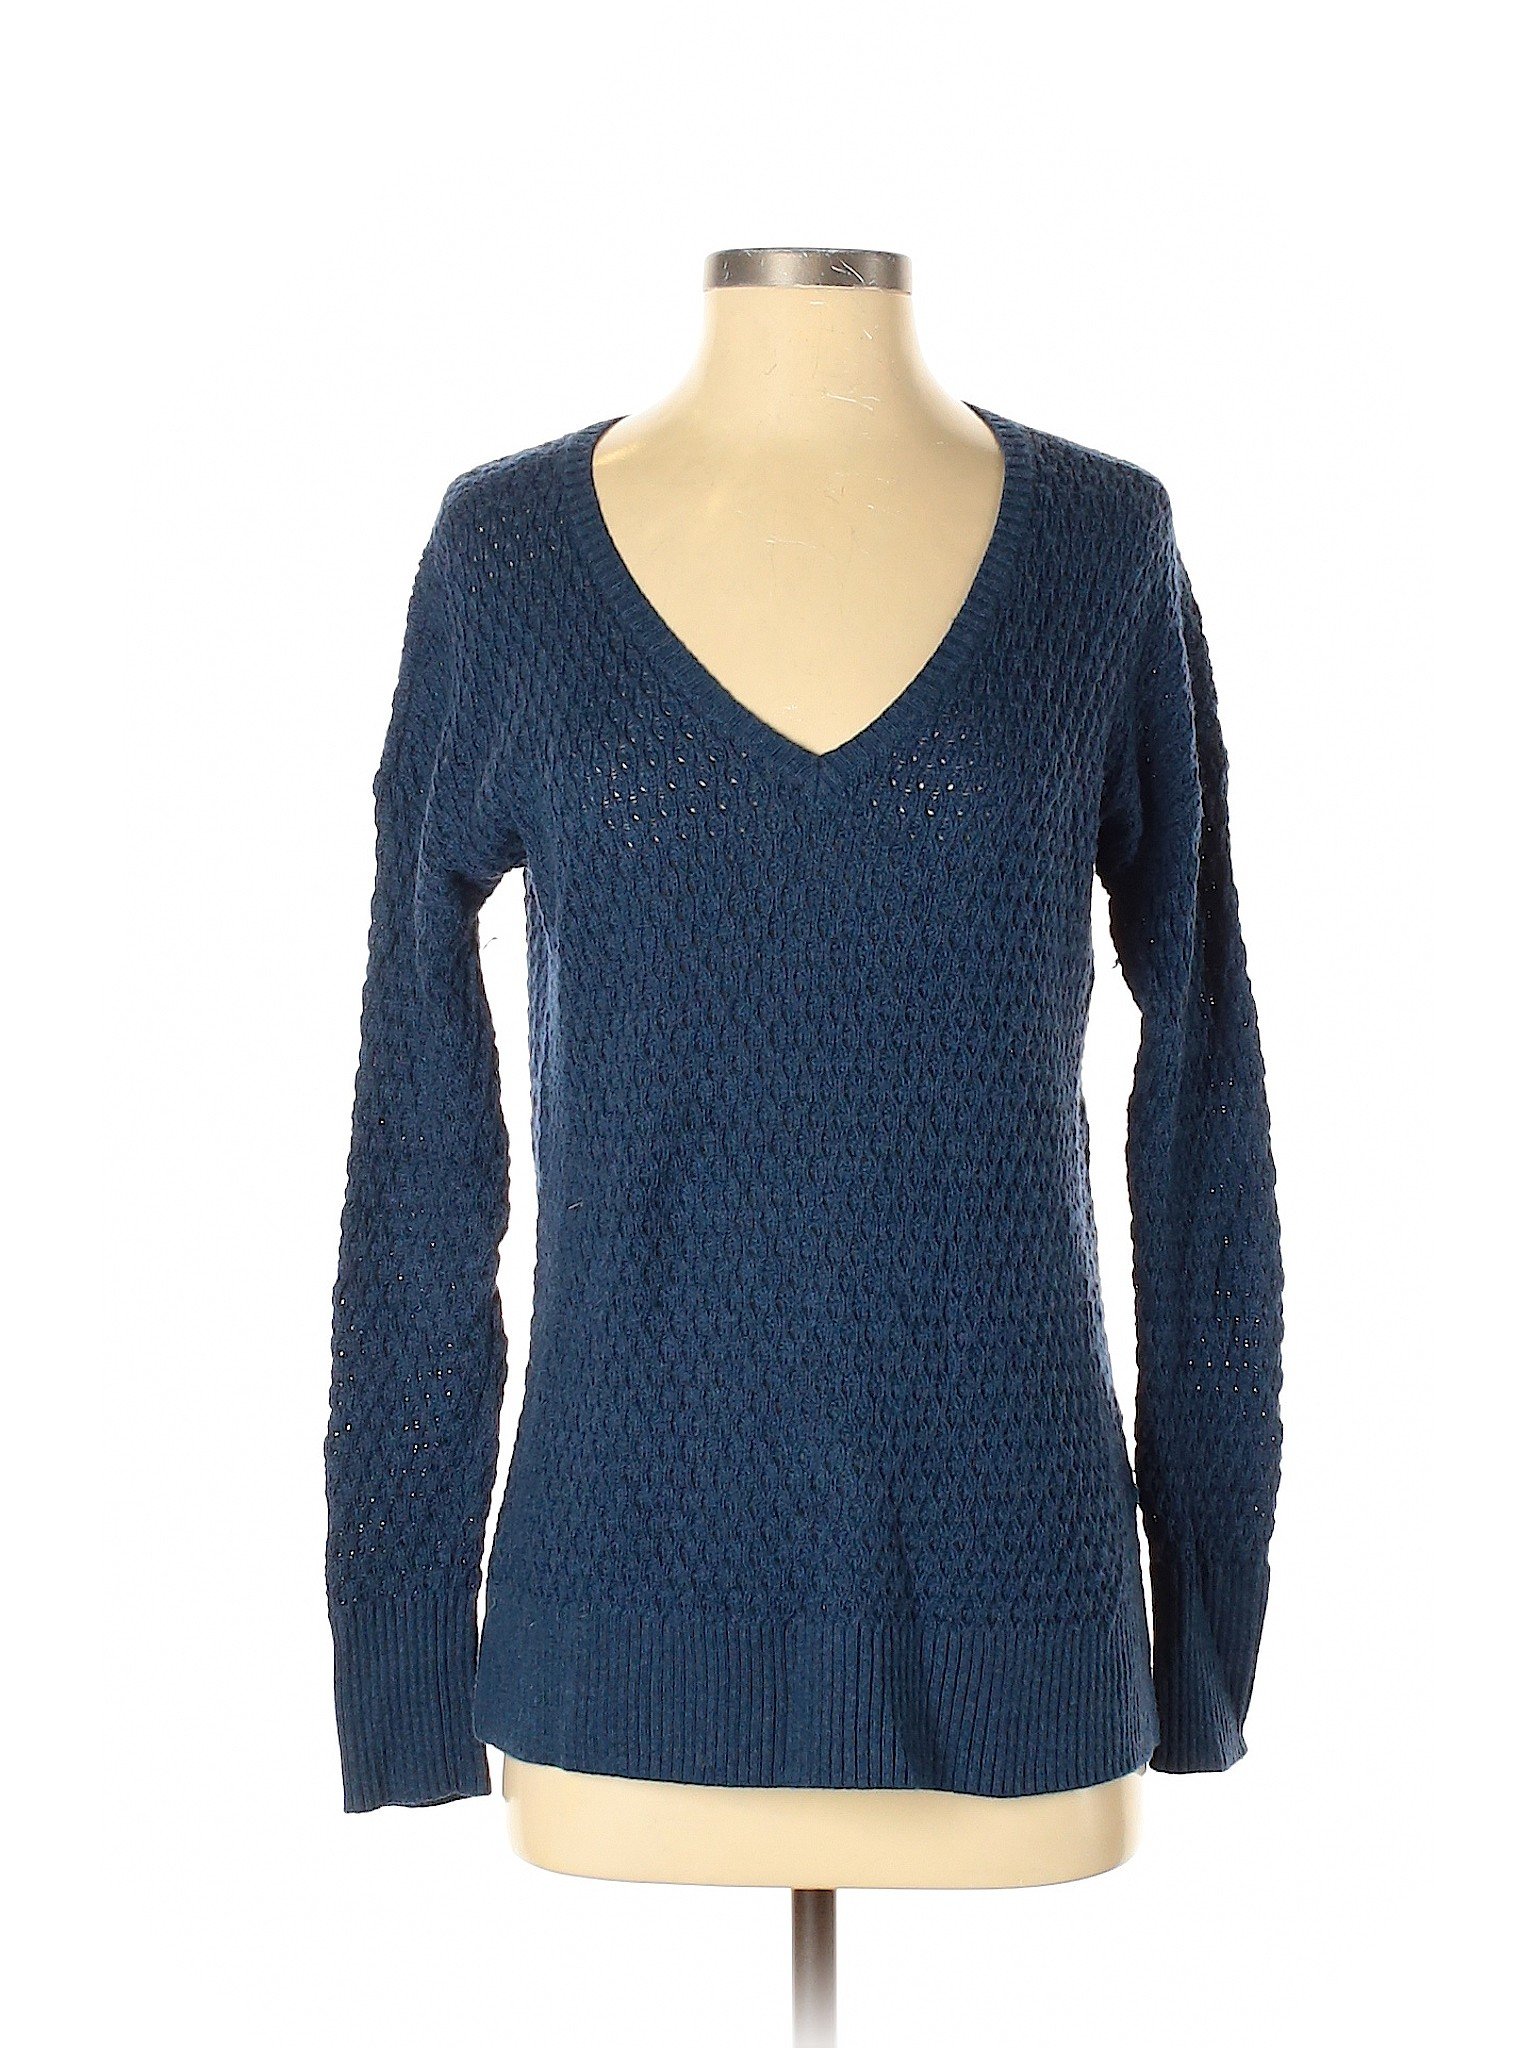 American Eagle Outfitters Women Blue Pullover Sweater S | eBay